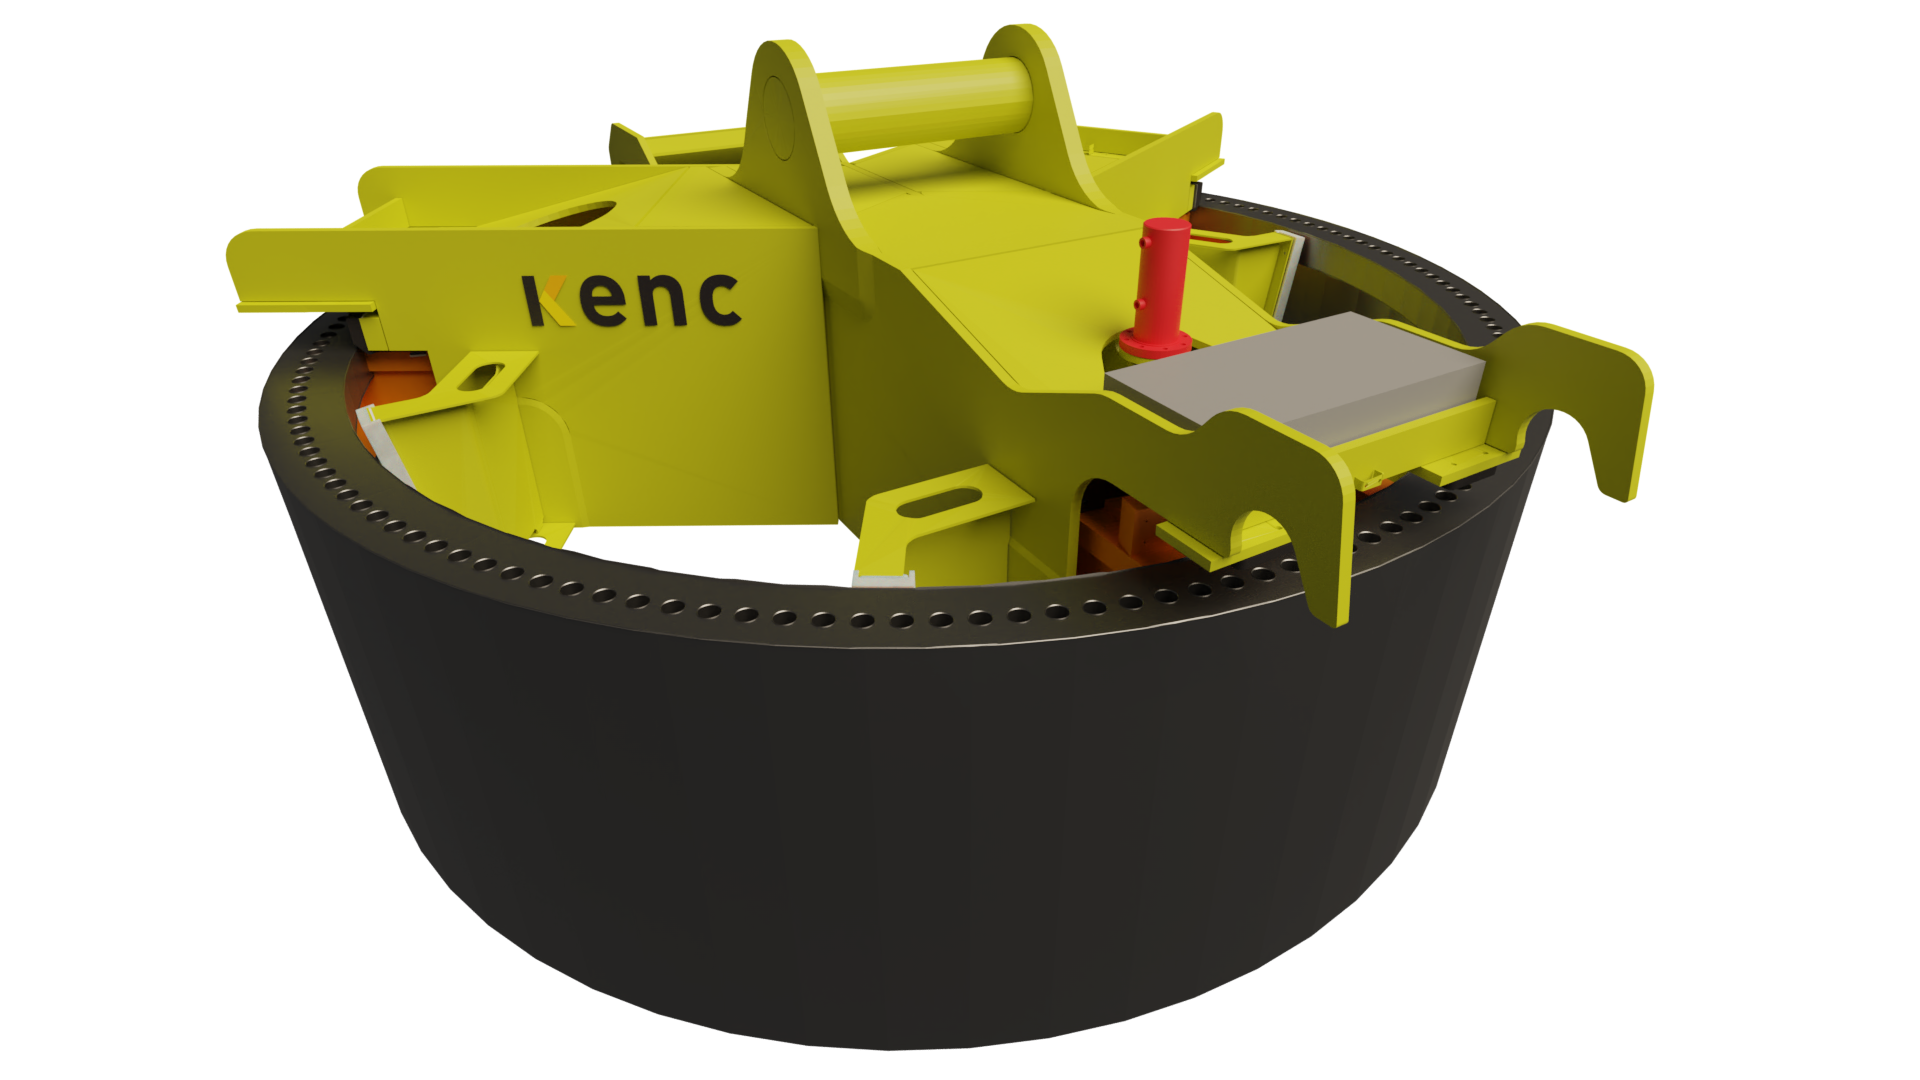 KENC chosen for design and fabrication monopile upending tool